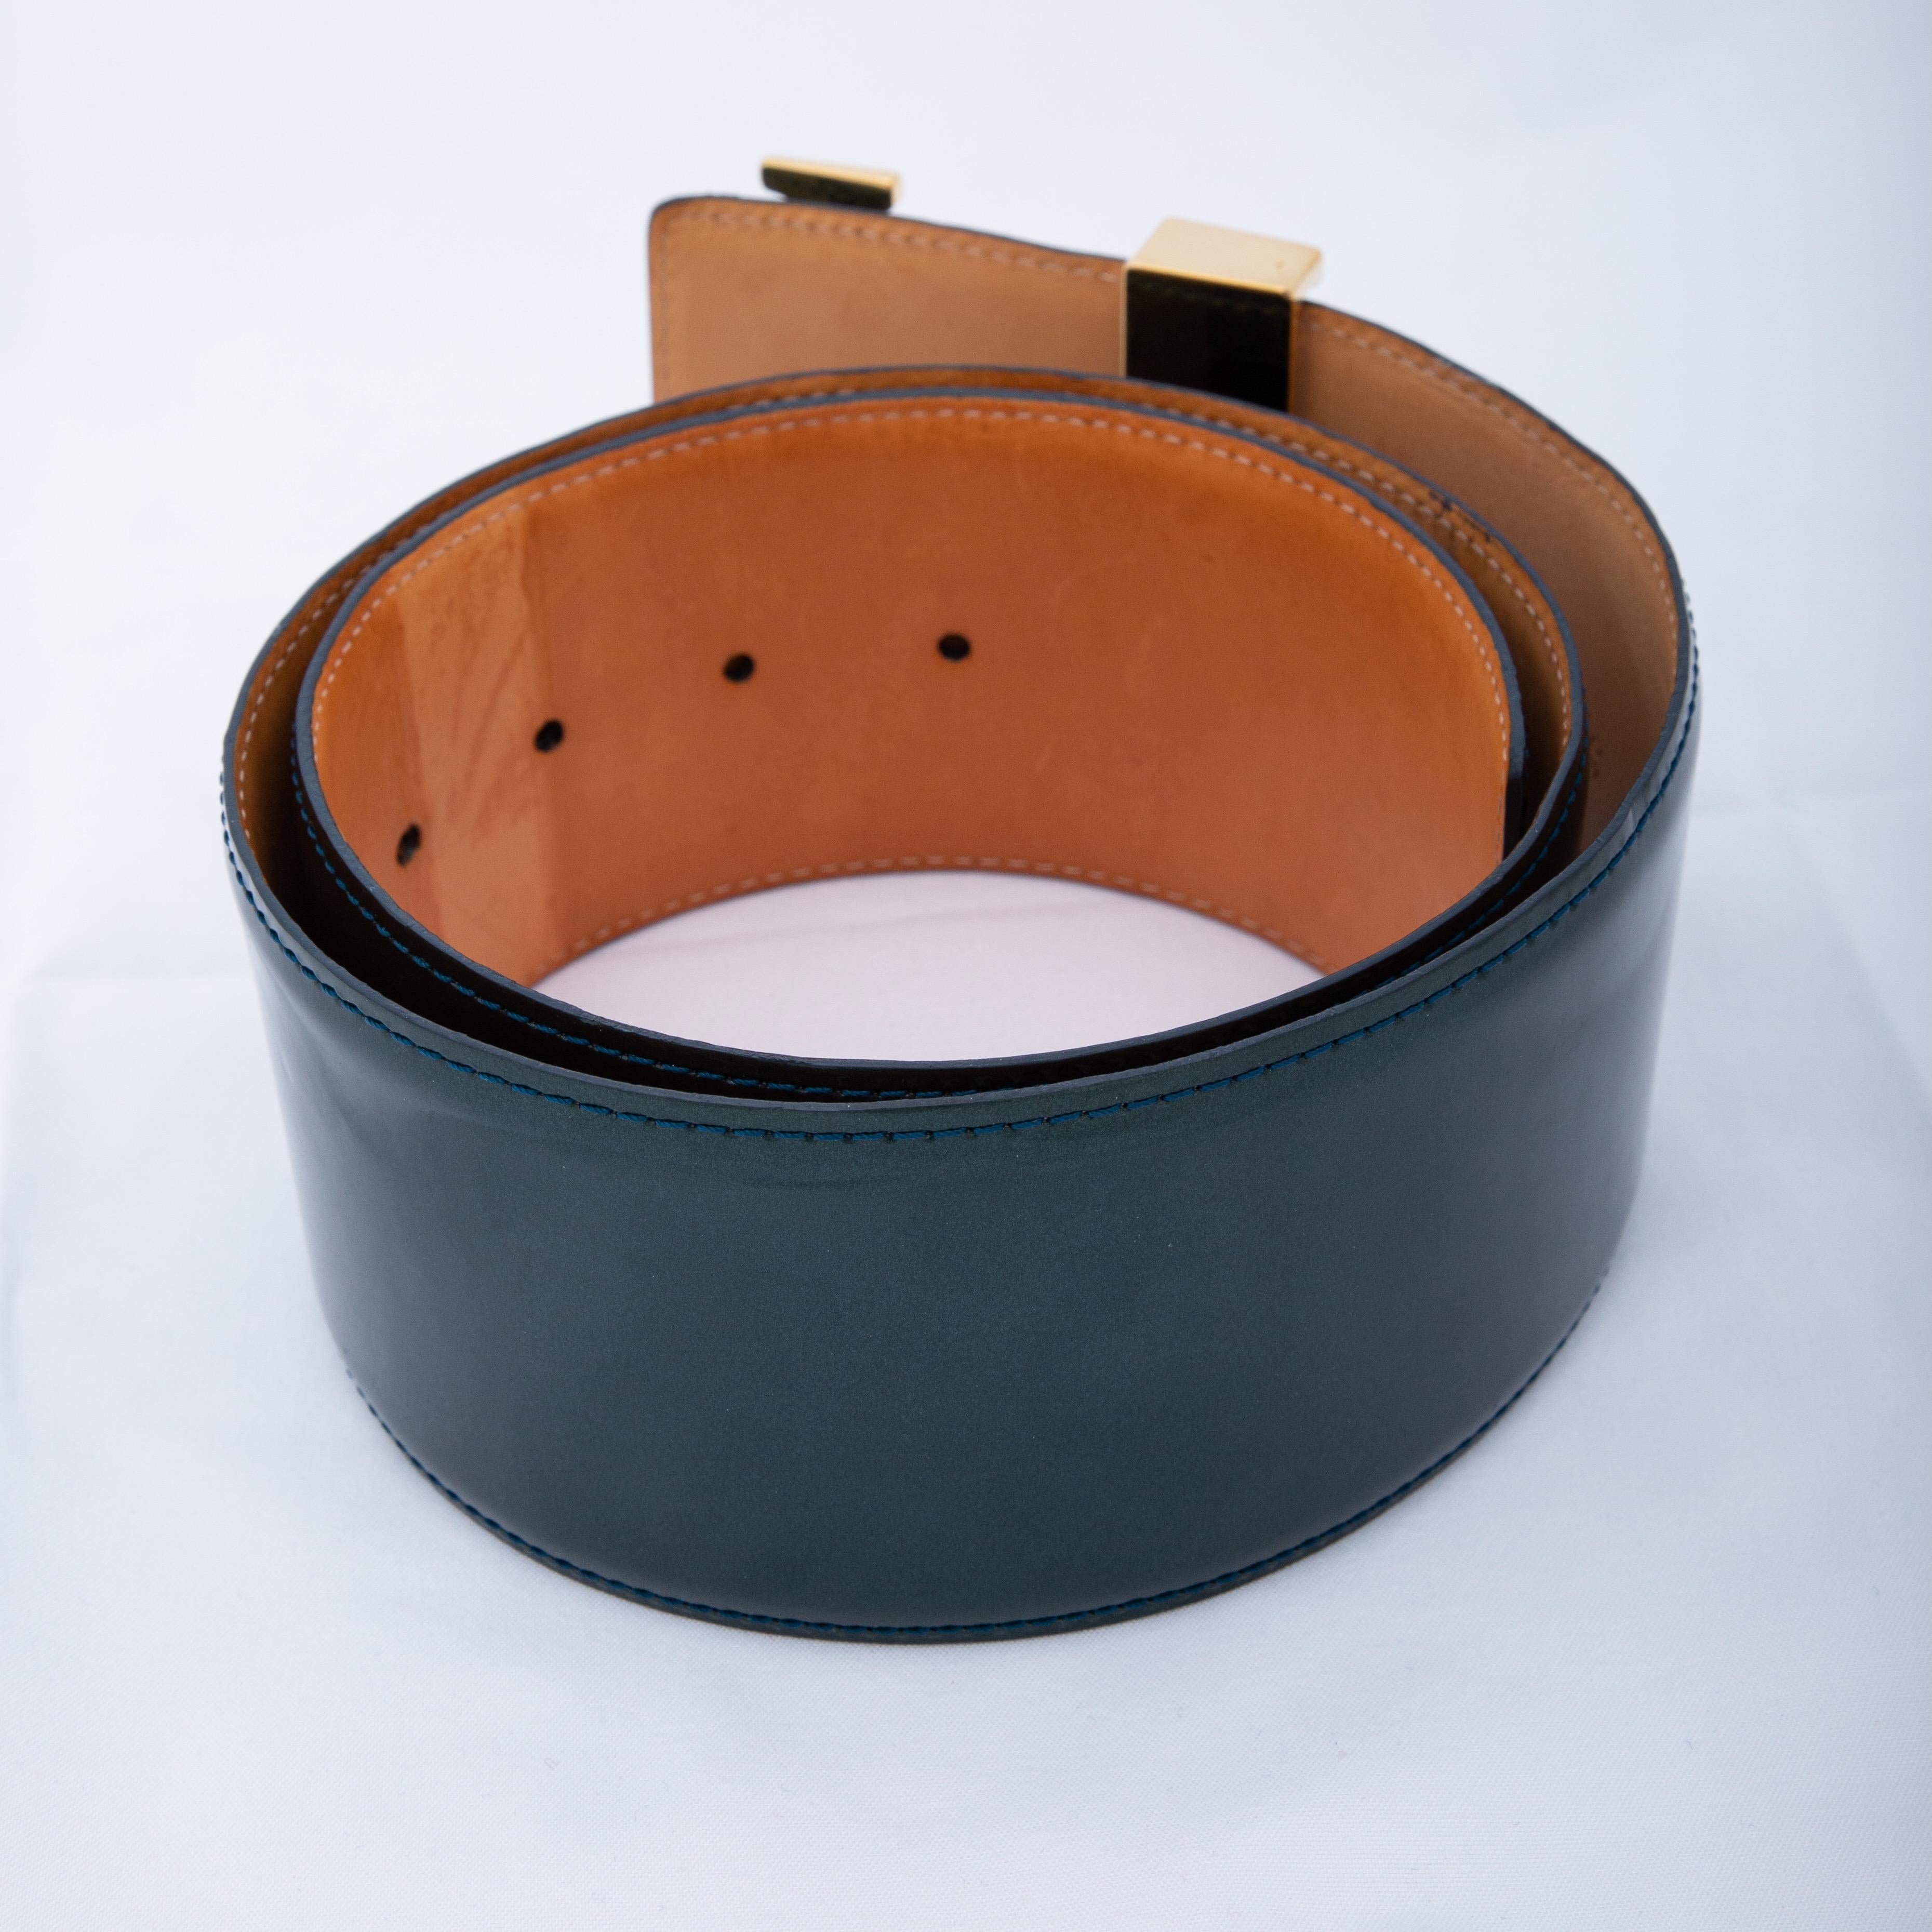 This belt is made of Louis Vuitton Vernis patent leather in dark green. The belt features a large logo buckle in gold tone and a vachetta leather back. The belt is from 2009.

COLOR: Dark green
MATERIAL: Patent leather
DATE CODE: CT2029
CODE: